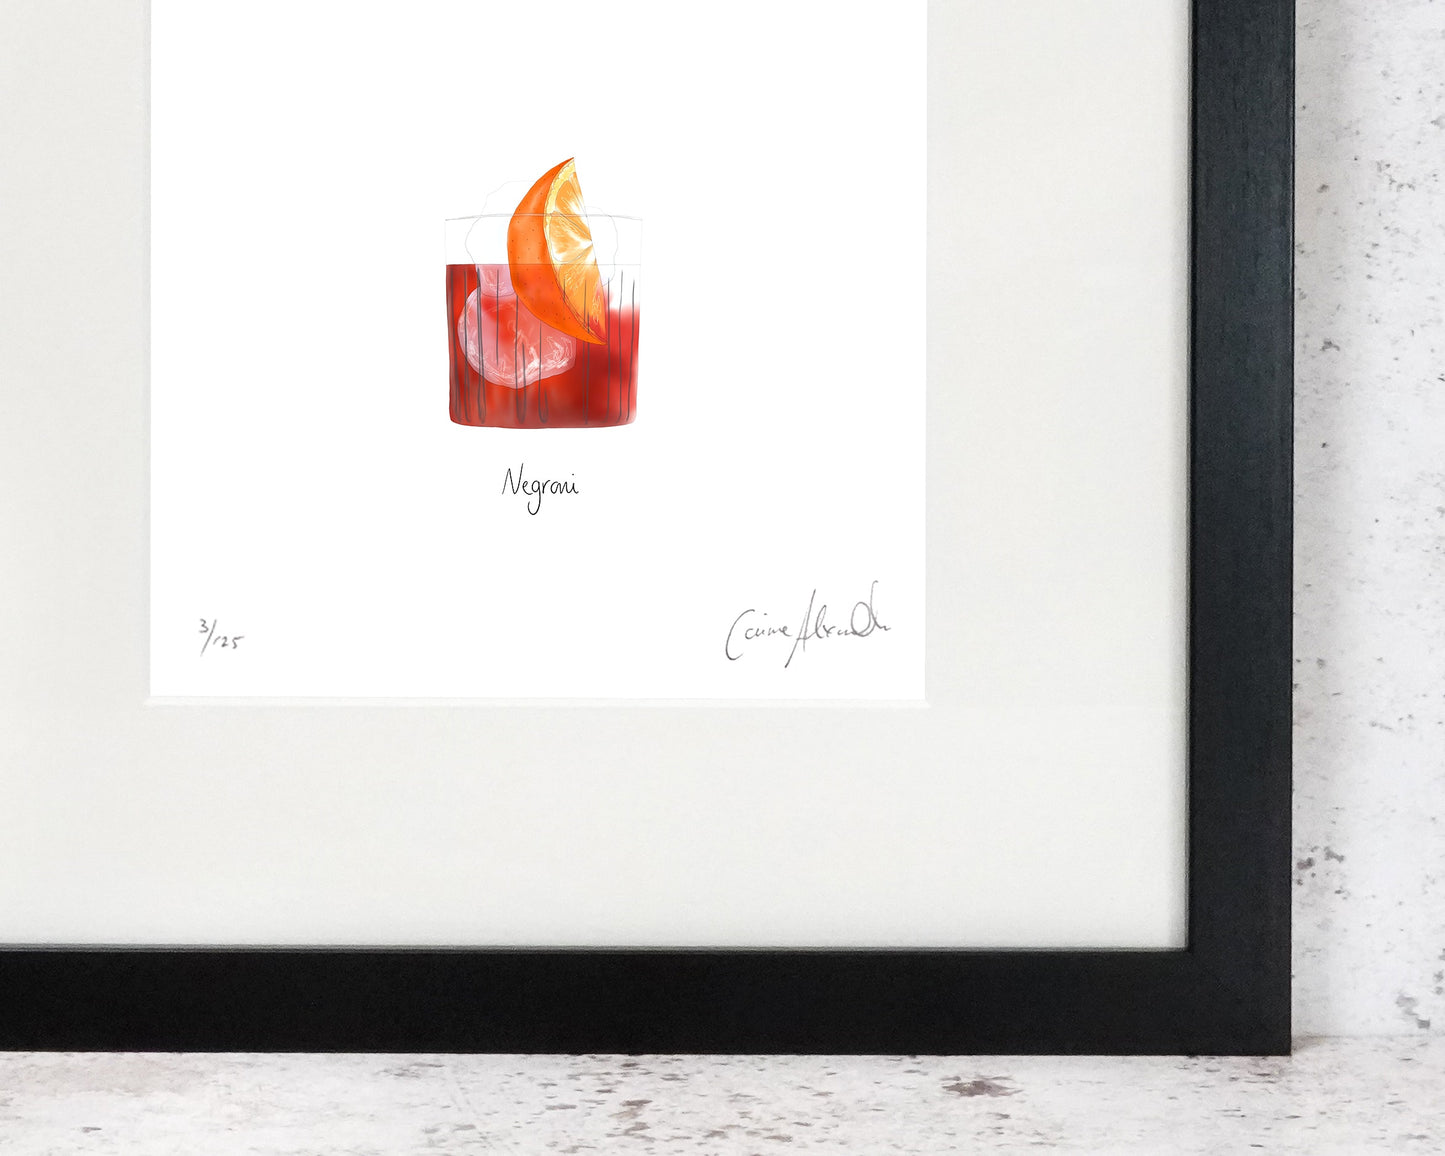 Negroni limited edition cocktail print